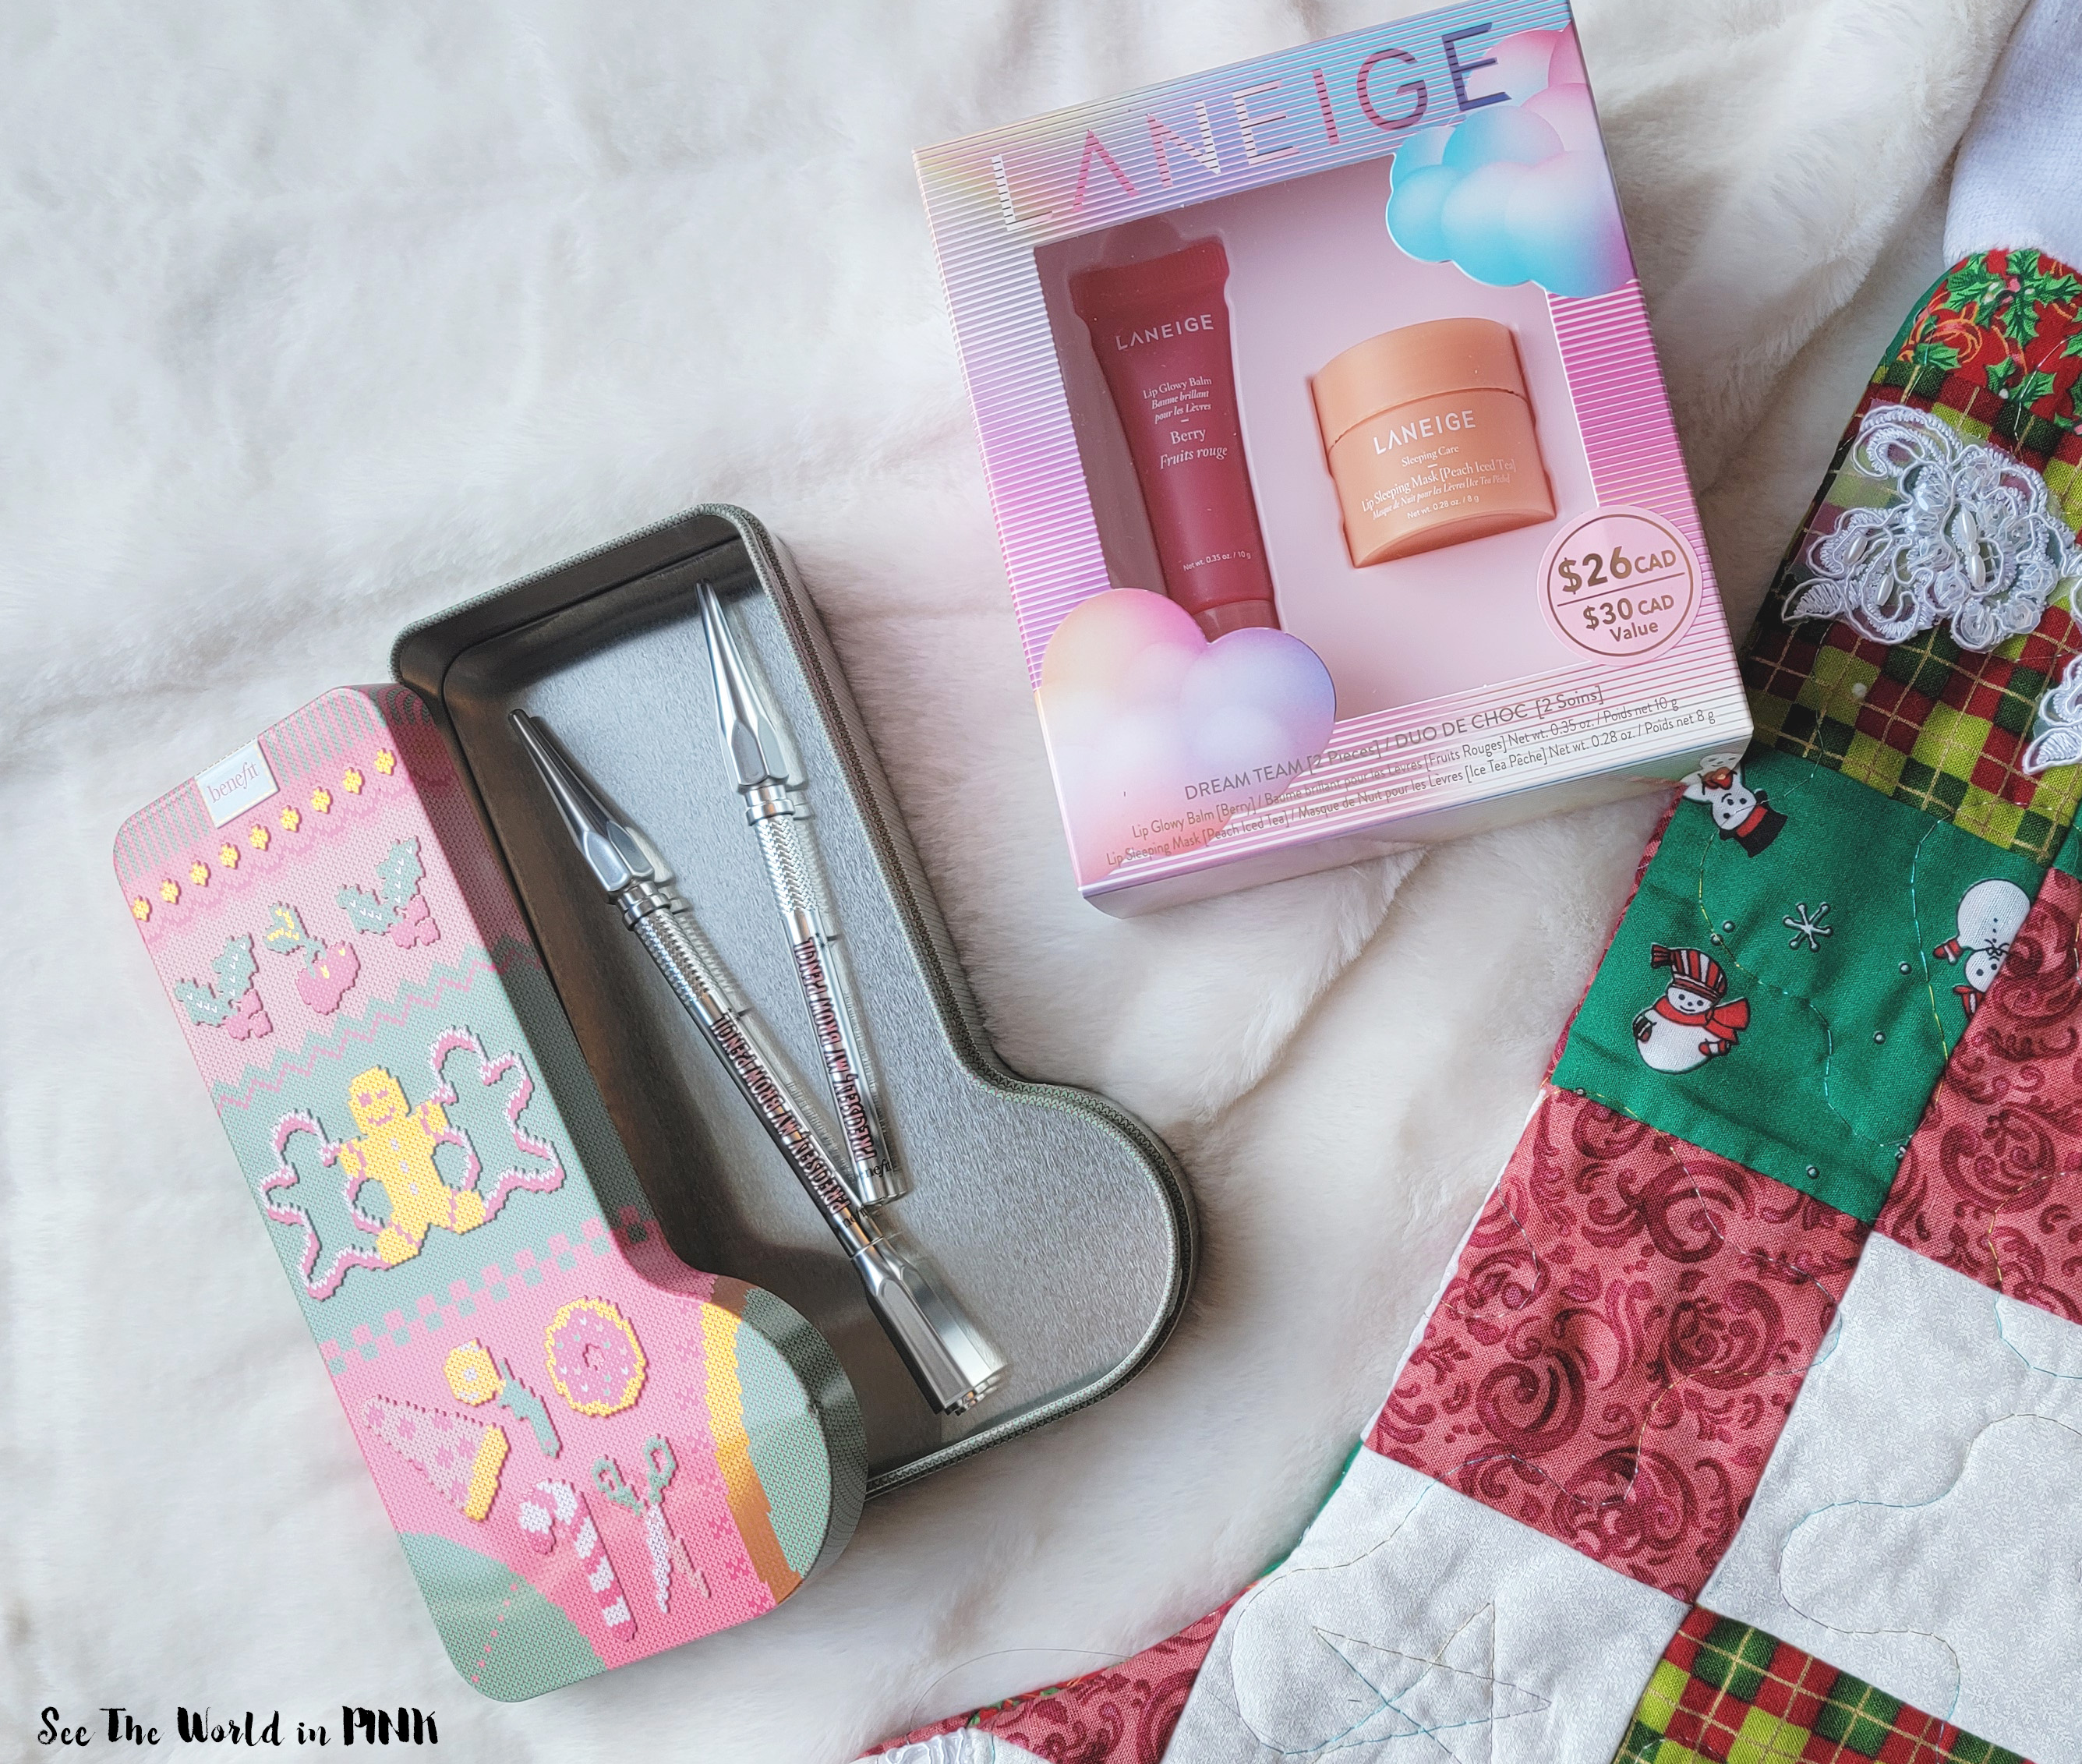 Beauty Gift Sets That Caught My Eye This Year - Last Minute Gifts and Stocking Stuffers for Beauty Lovers